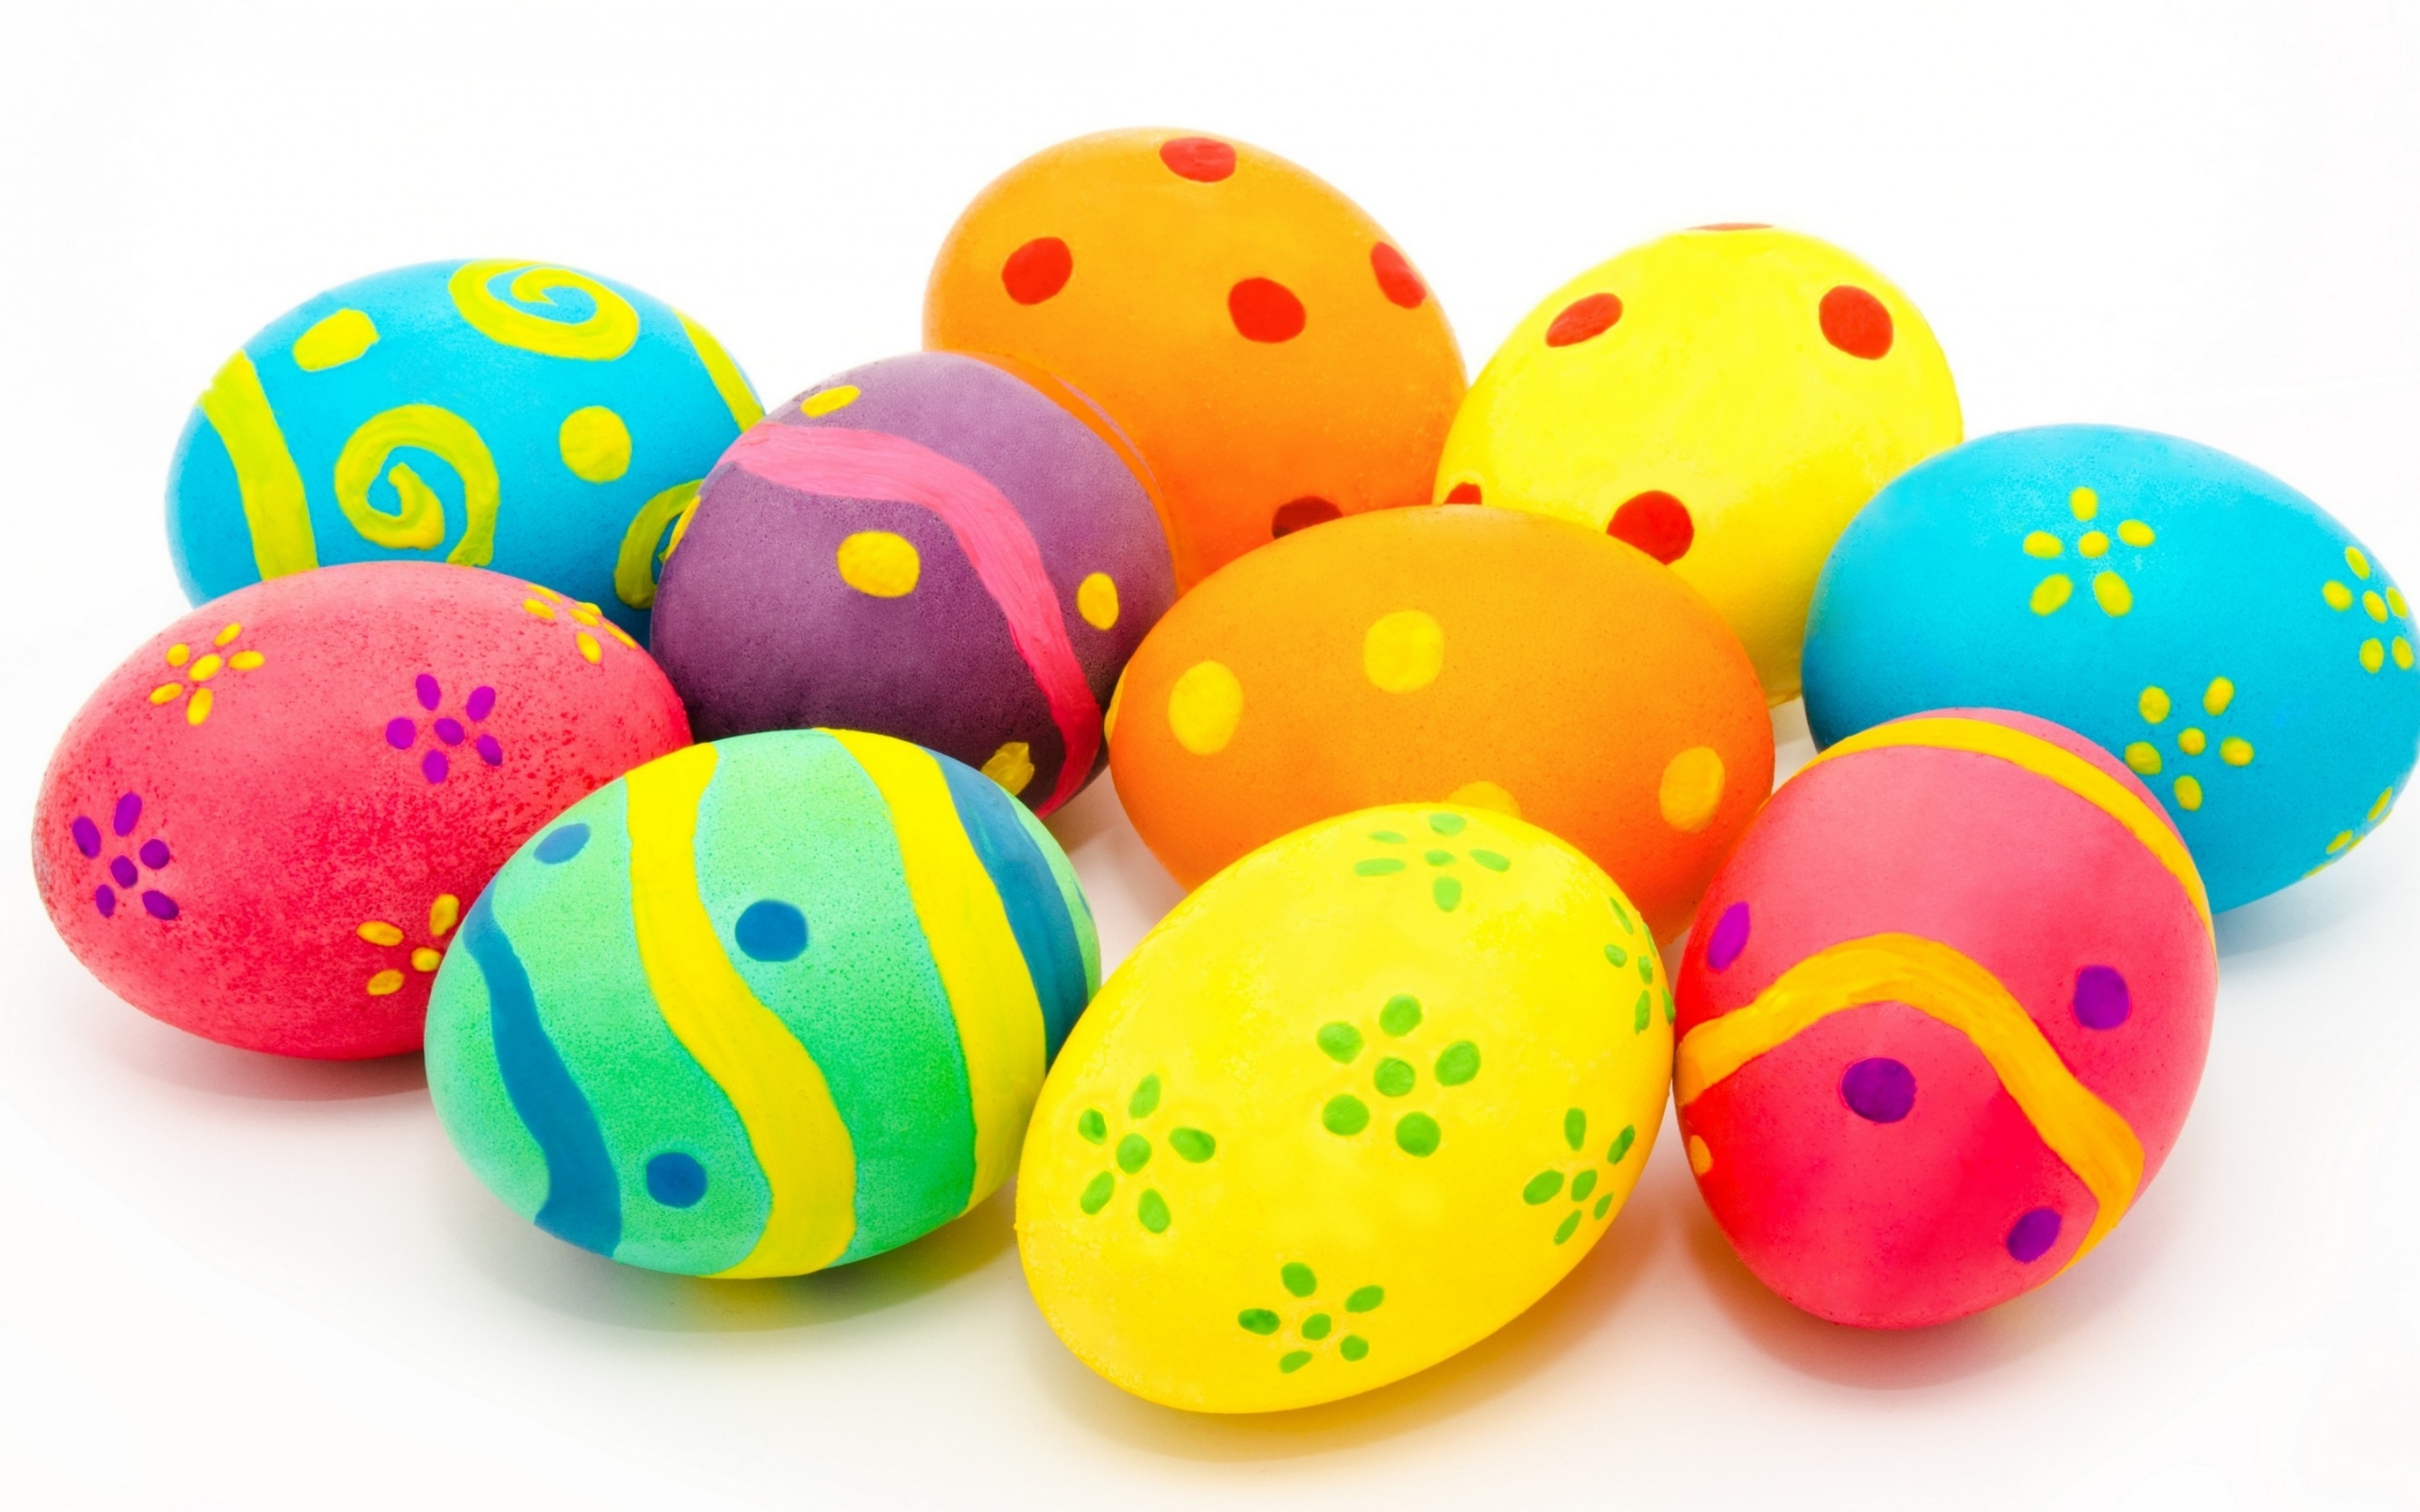 Many Colorful Easter Eggs for 2560 x 1600 widescreen resolution